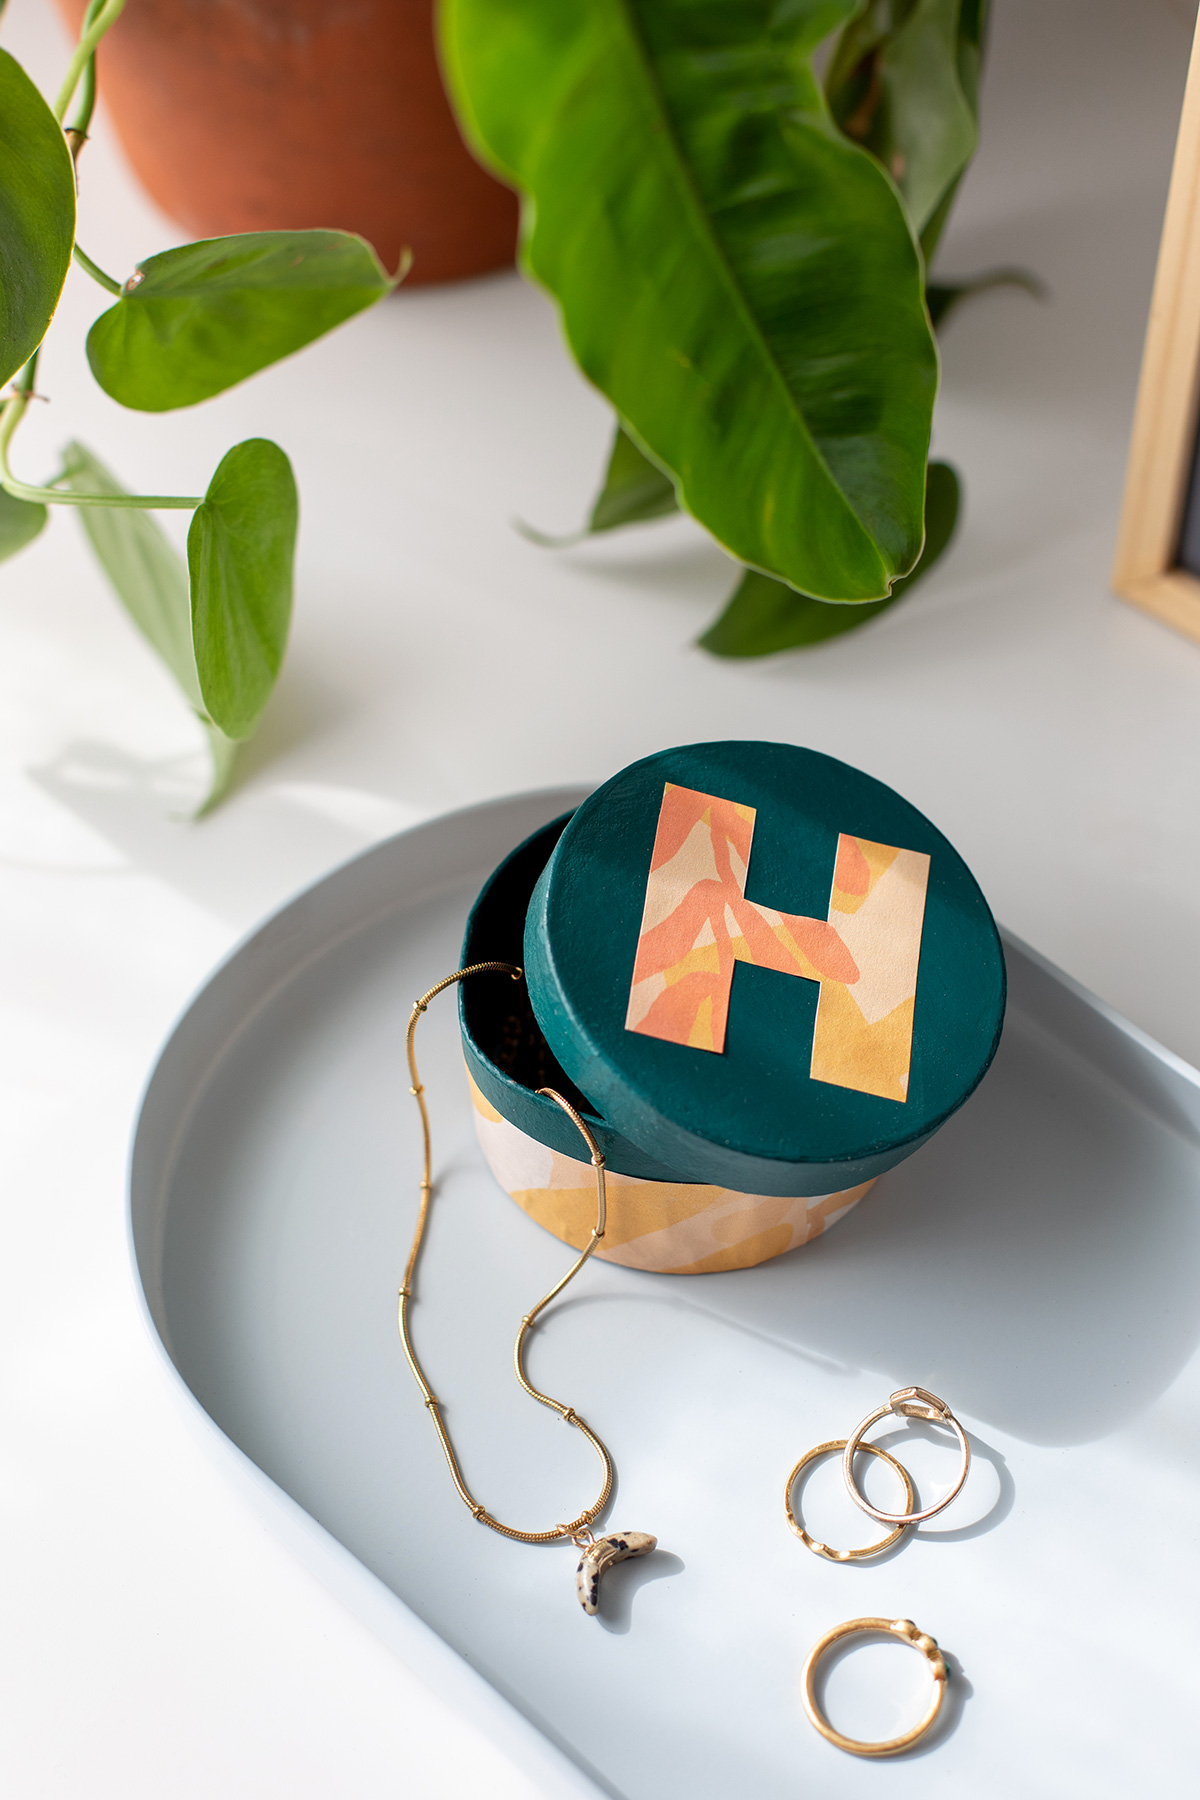 DIY Tropical Monogram Trinket Box /// By ctrl + curate for Design Fixation #diy #craft #letter #gift 